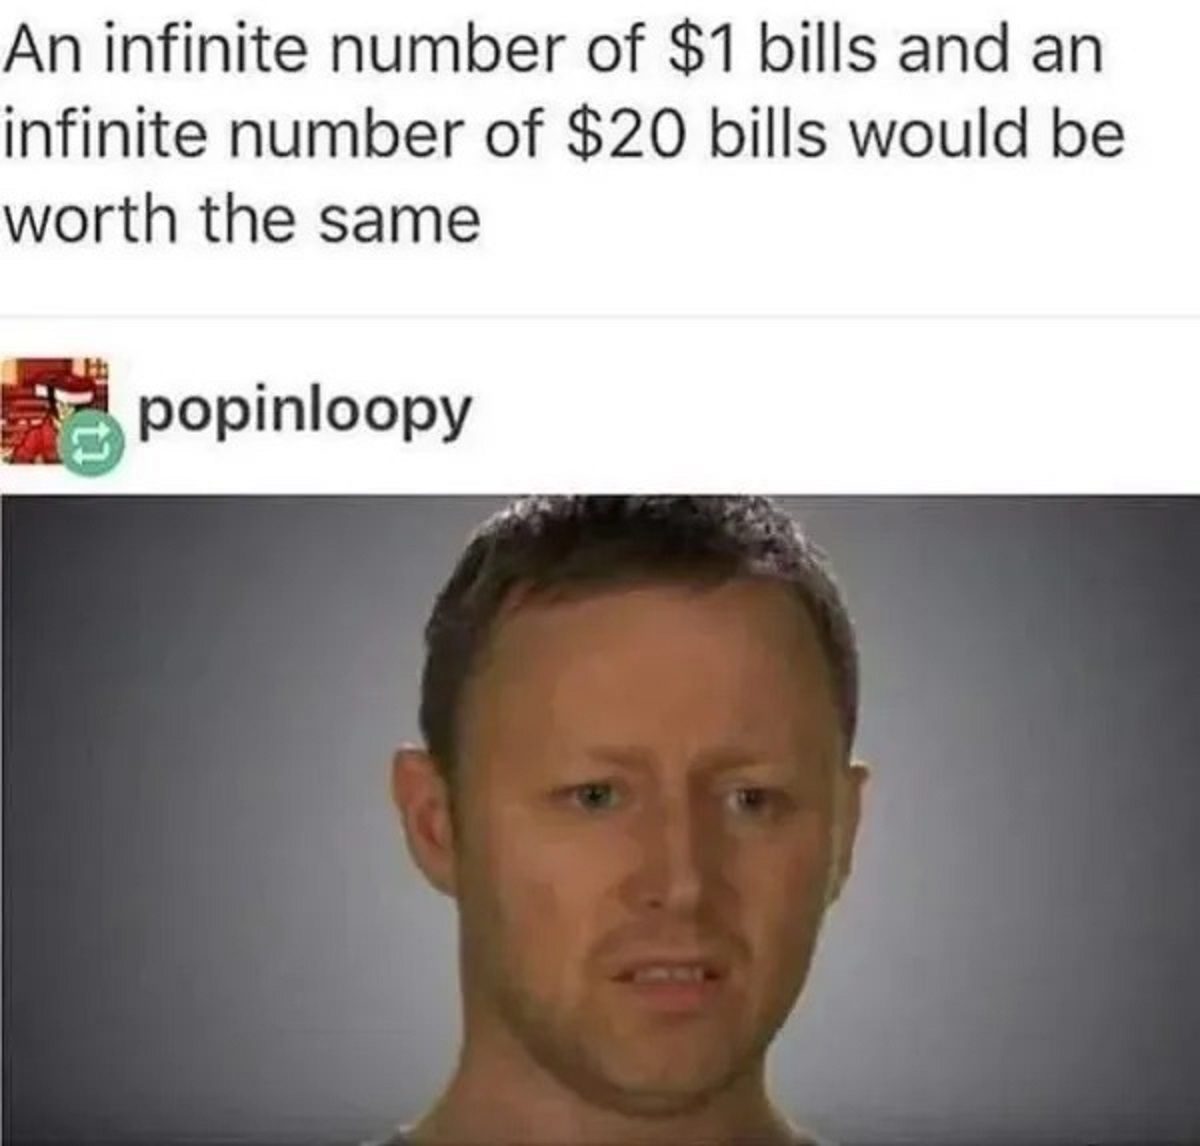 infinite number of $1 bills - An infinite number of $1 bills and an infinite number of $20 bills would be worth the same popinloopy